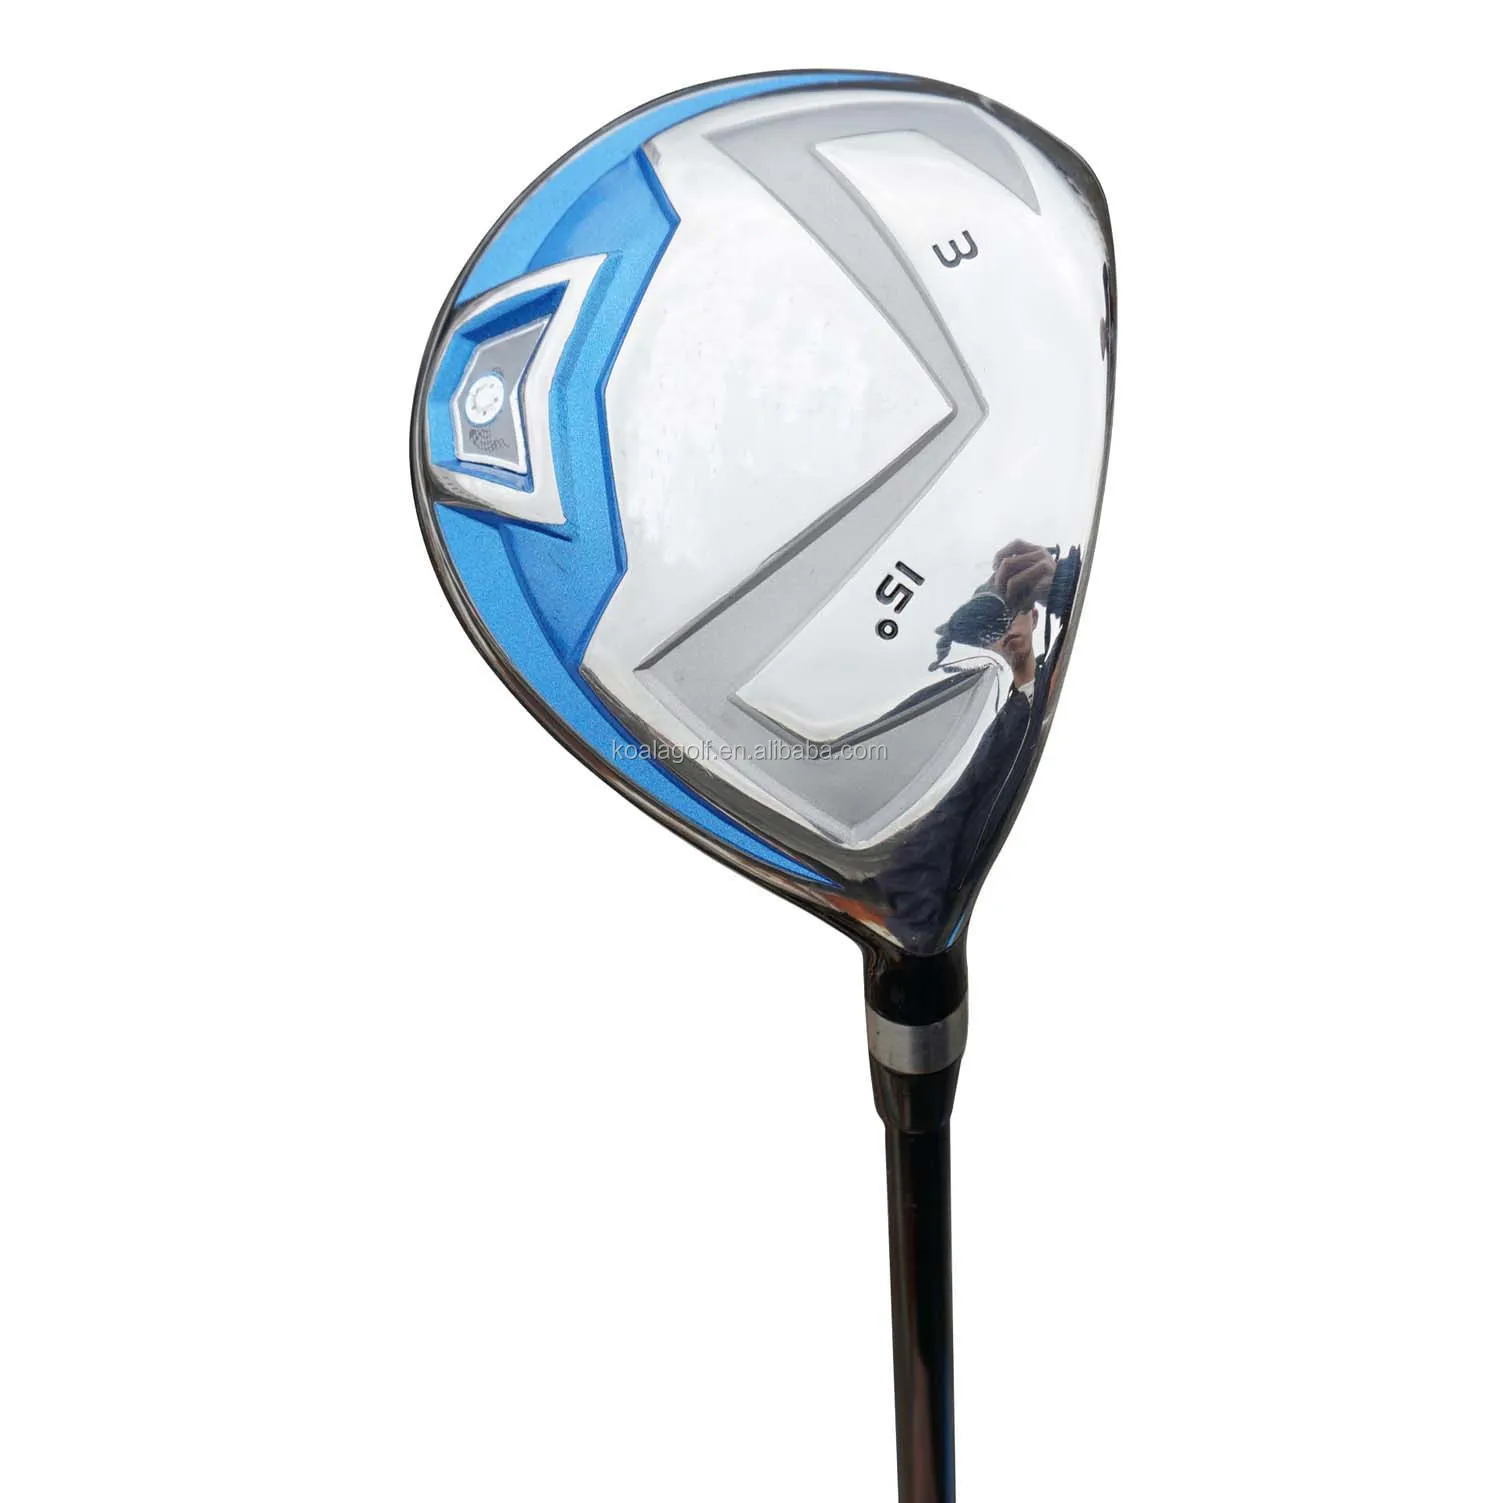 What Is The Largest Legal Size Golf Driver Head